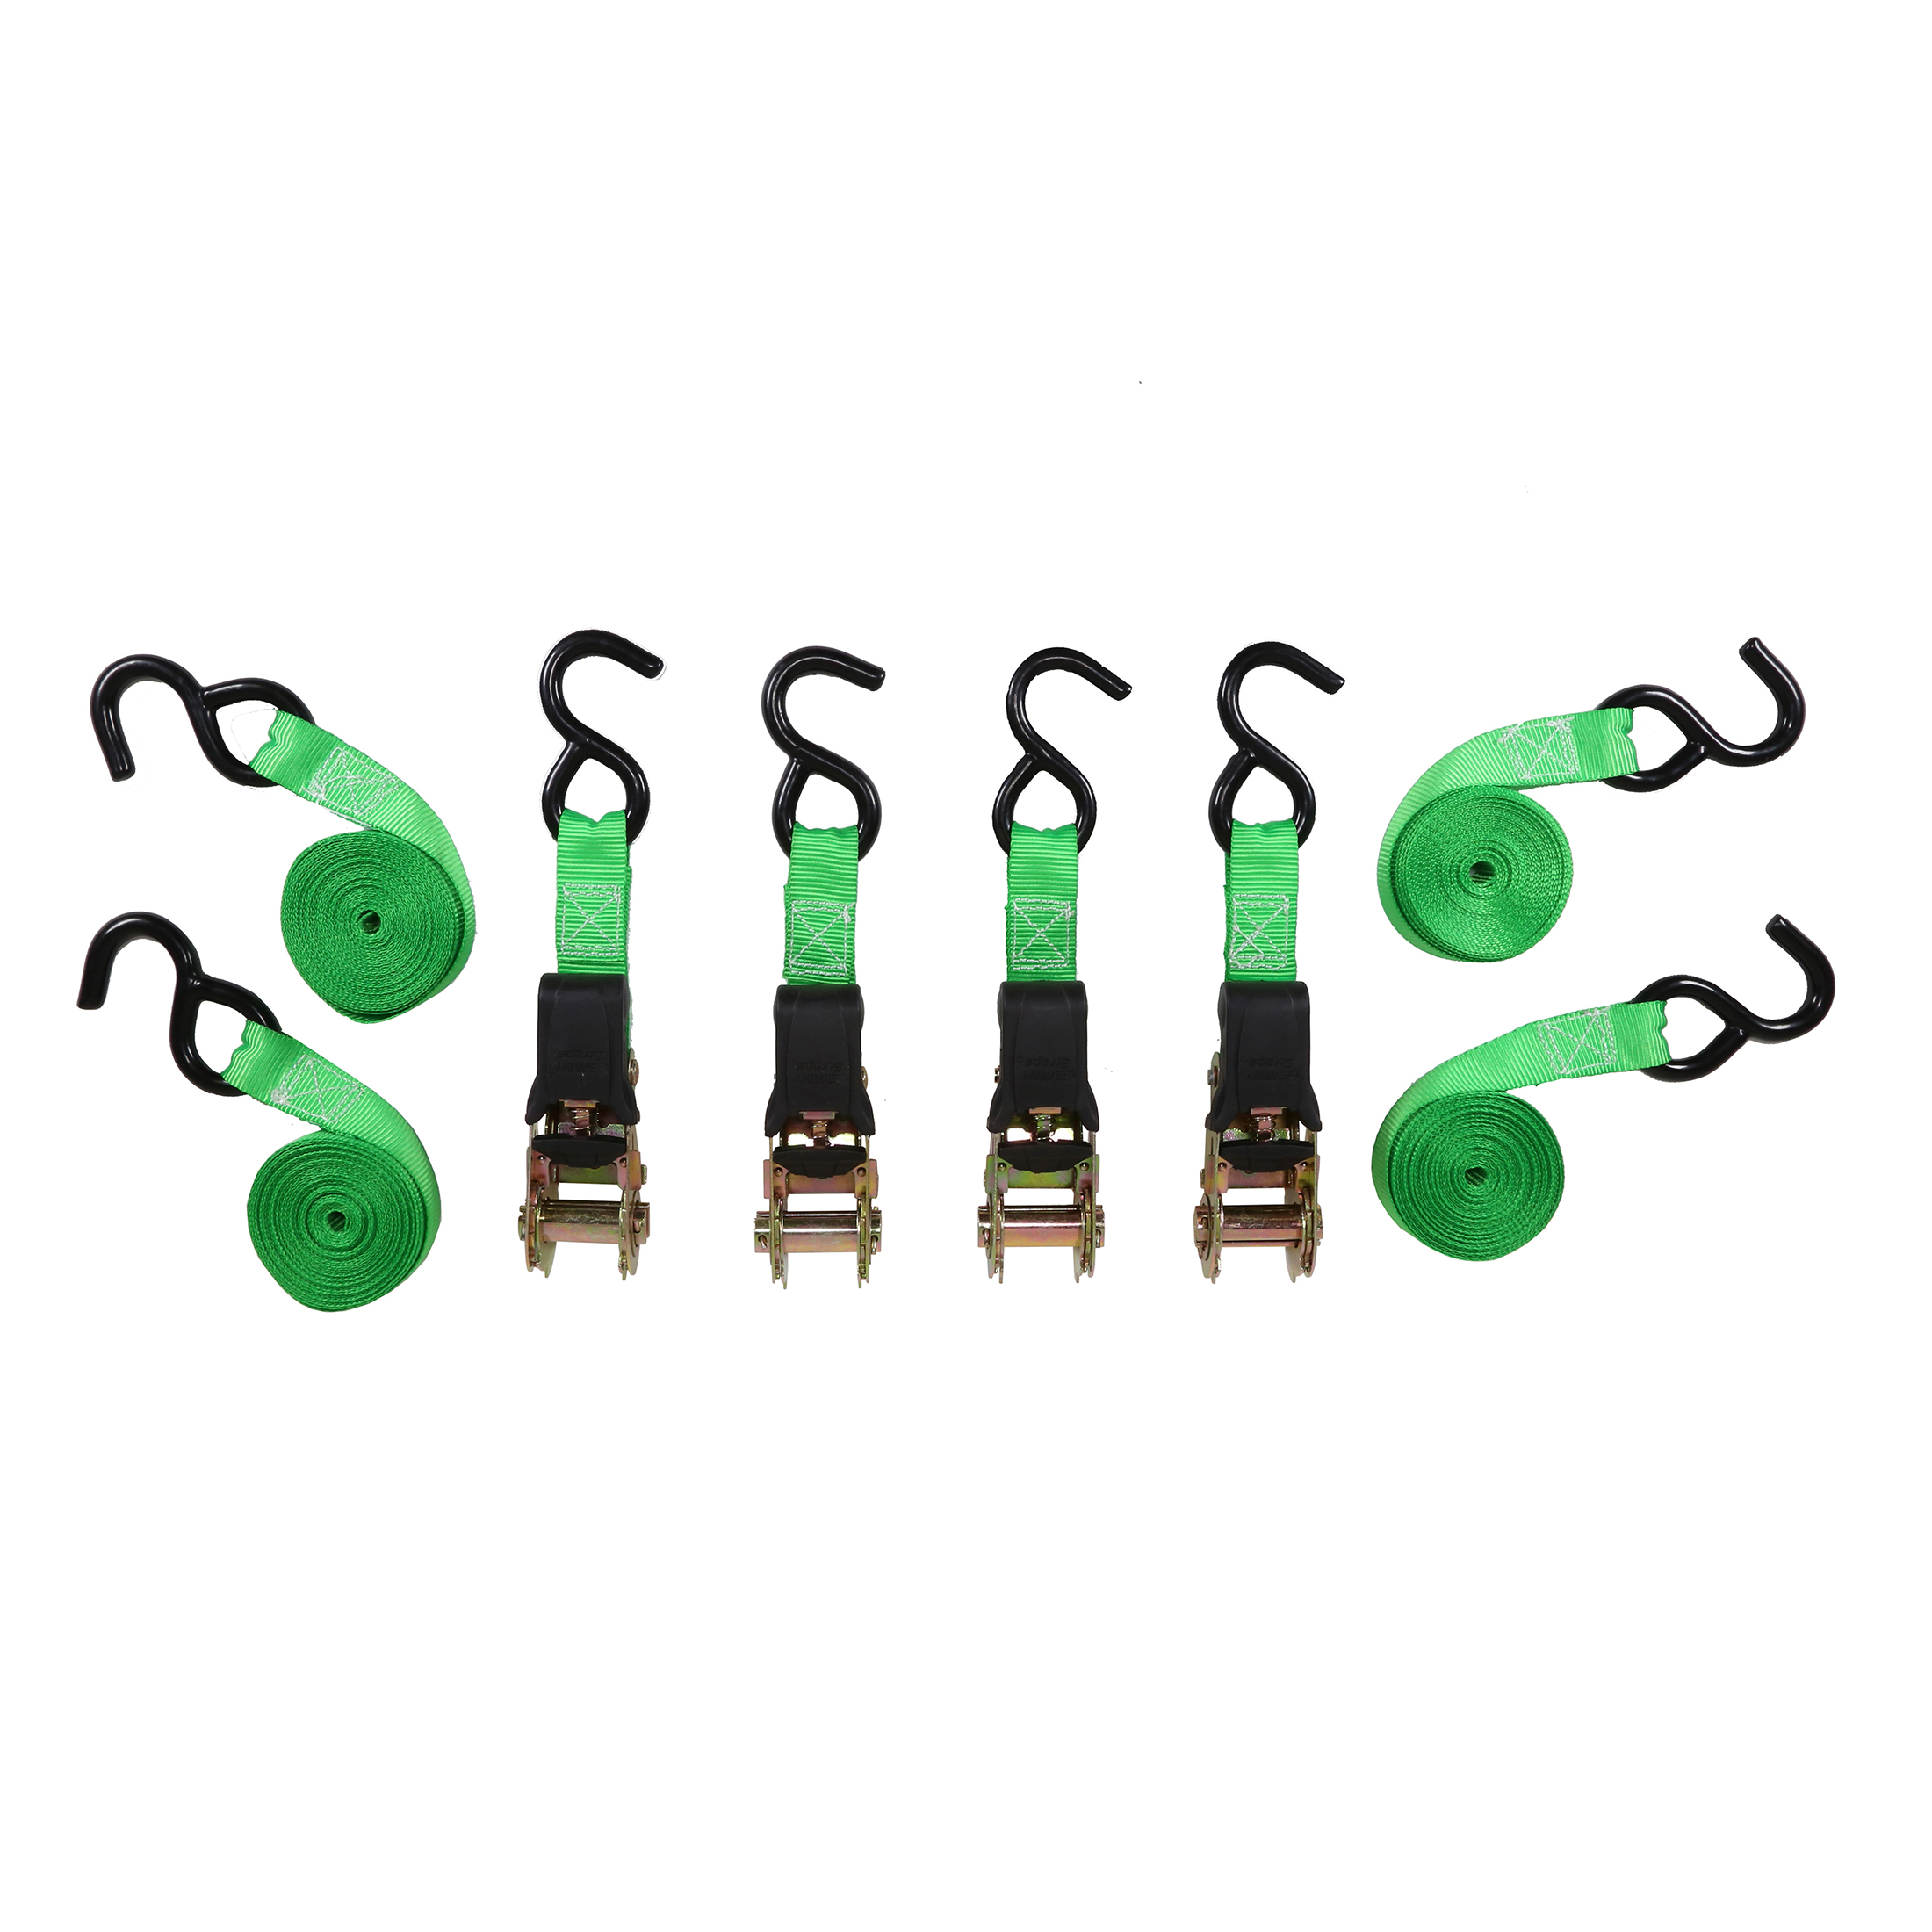 SmartStraps - 14' 1500 lb Padded Ratchet Tie Down 4 Pack Green - image 1 of 6